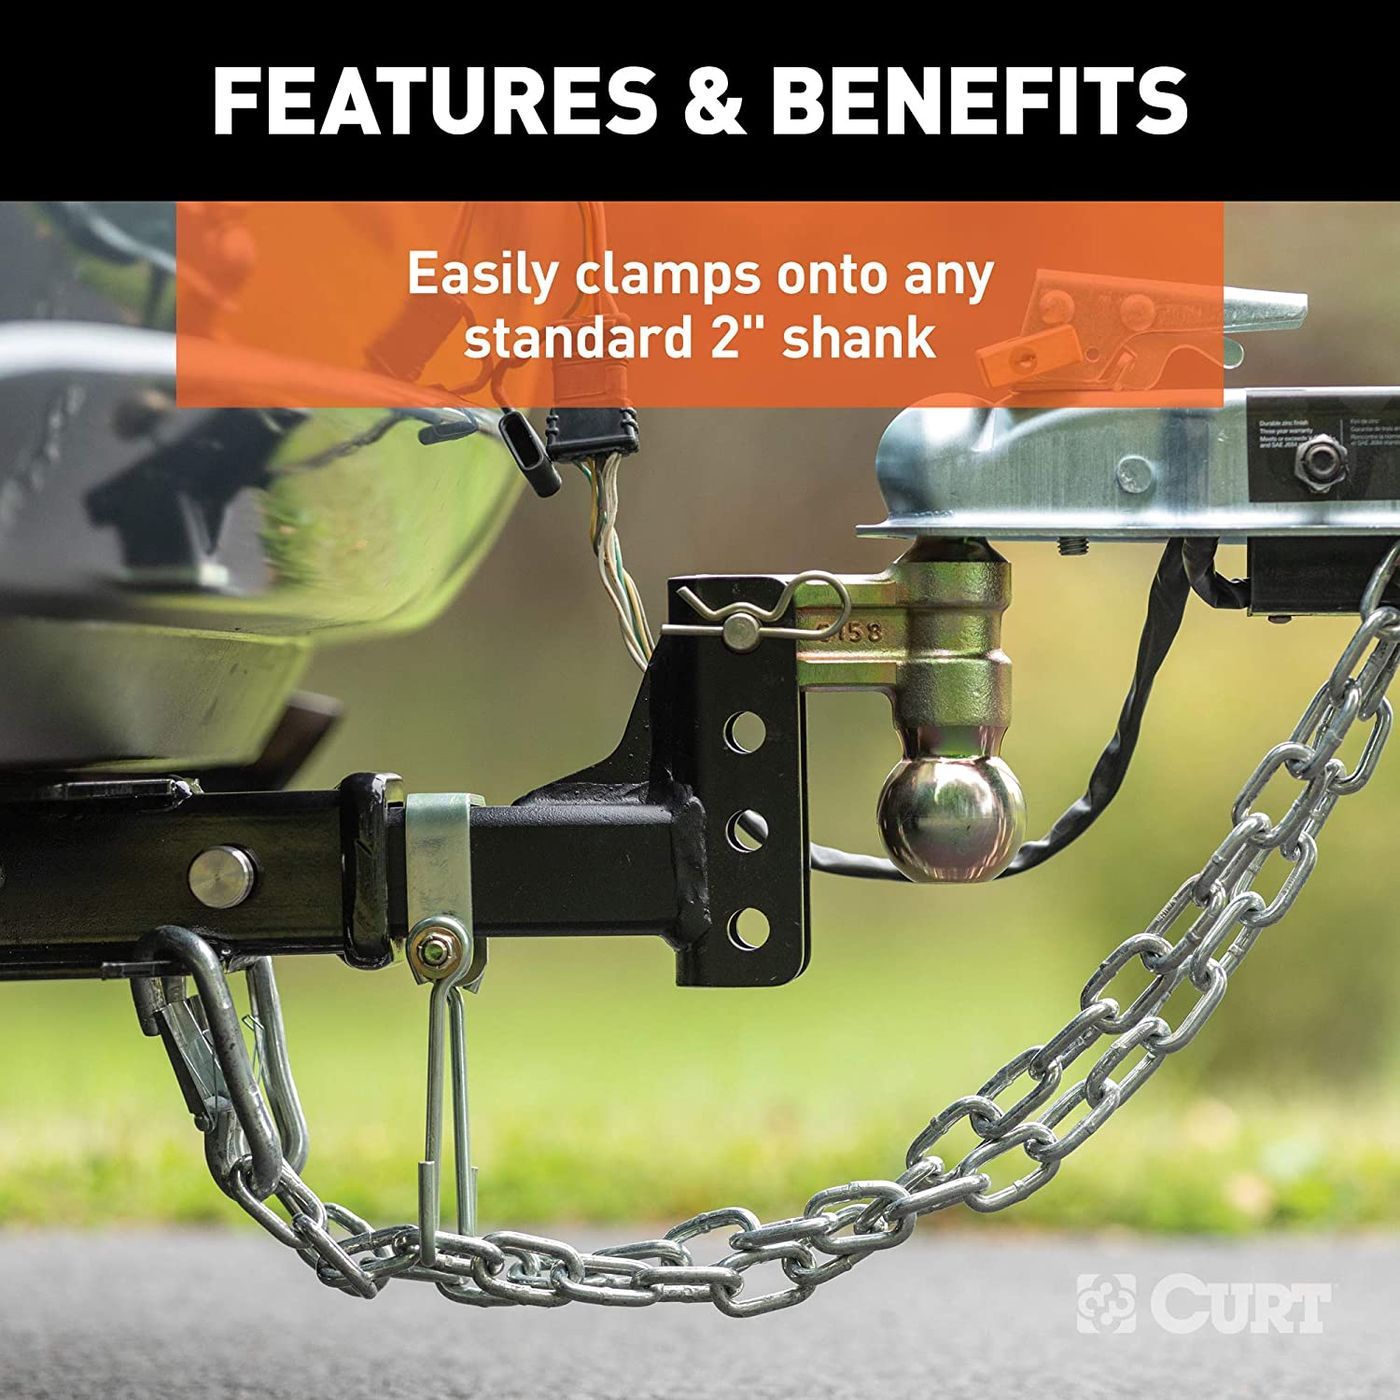 SAFETY CHAIN HOLDERS